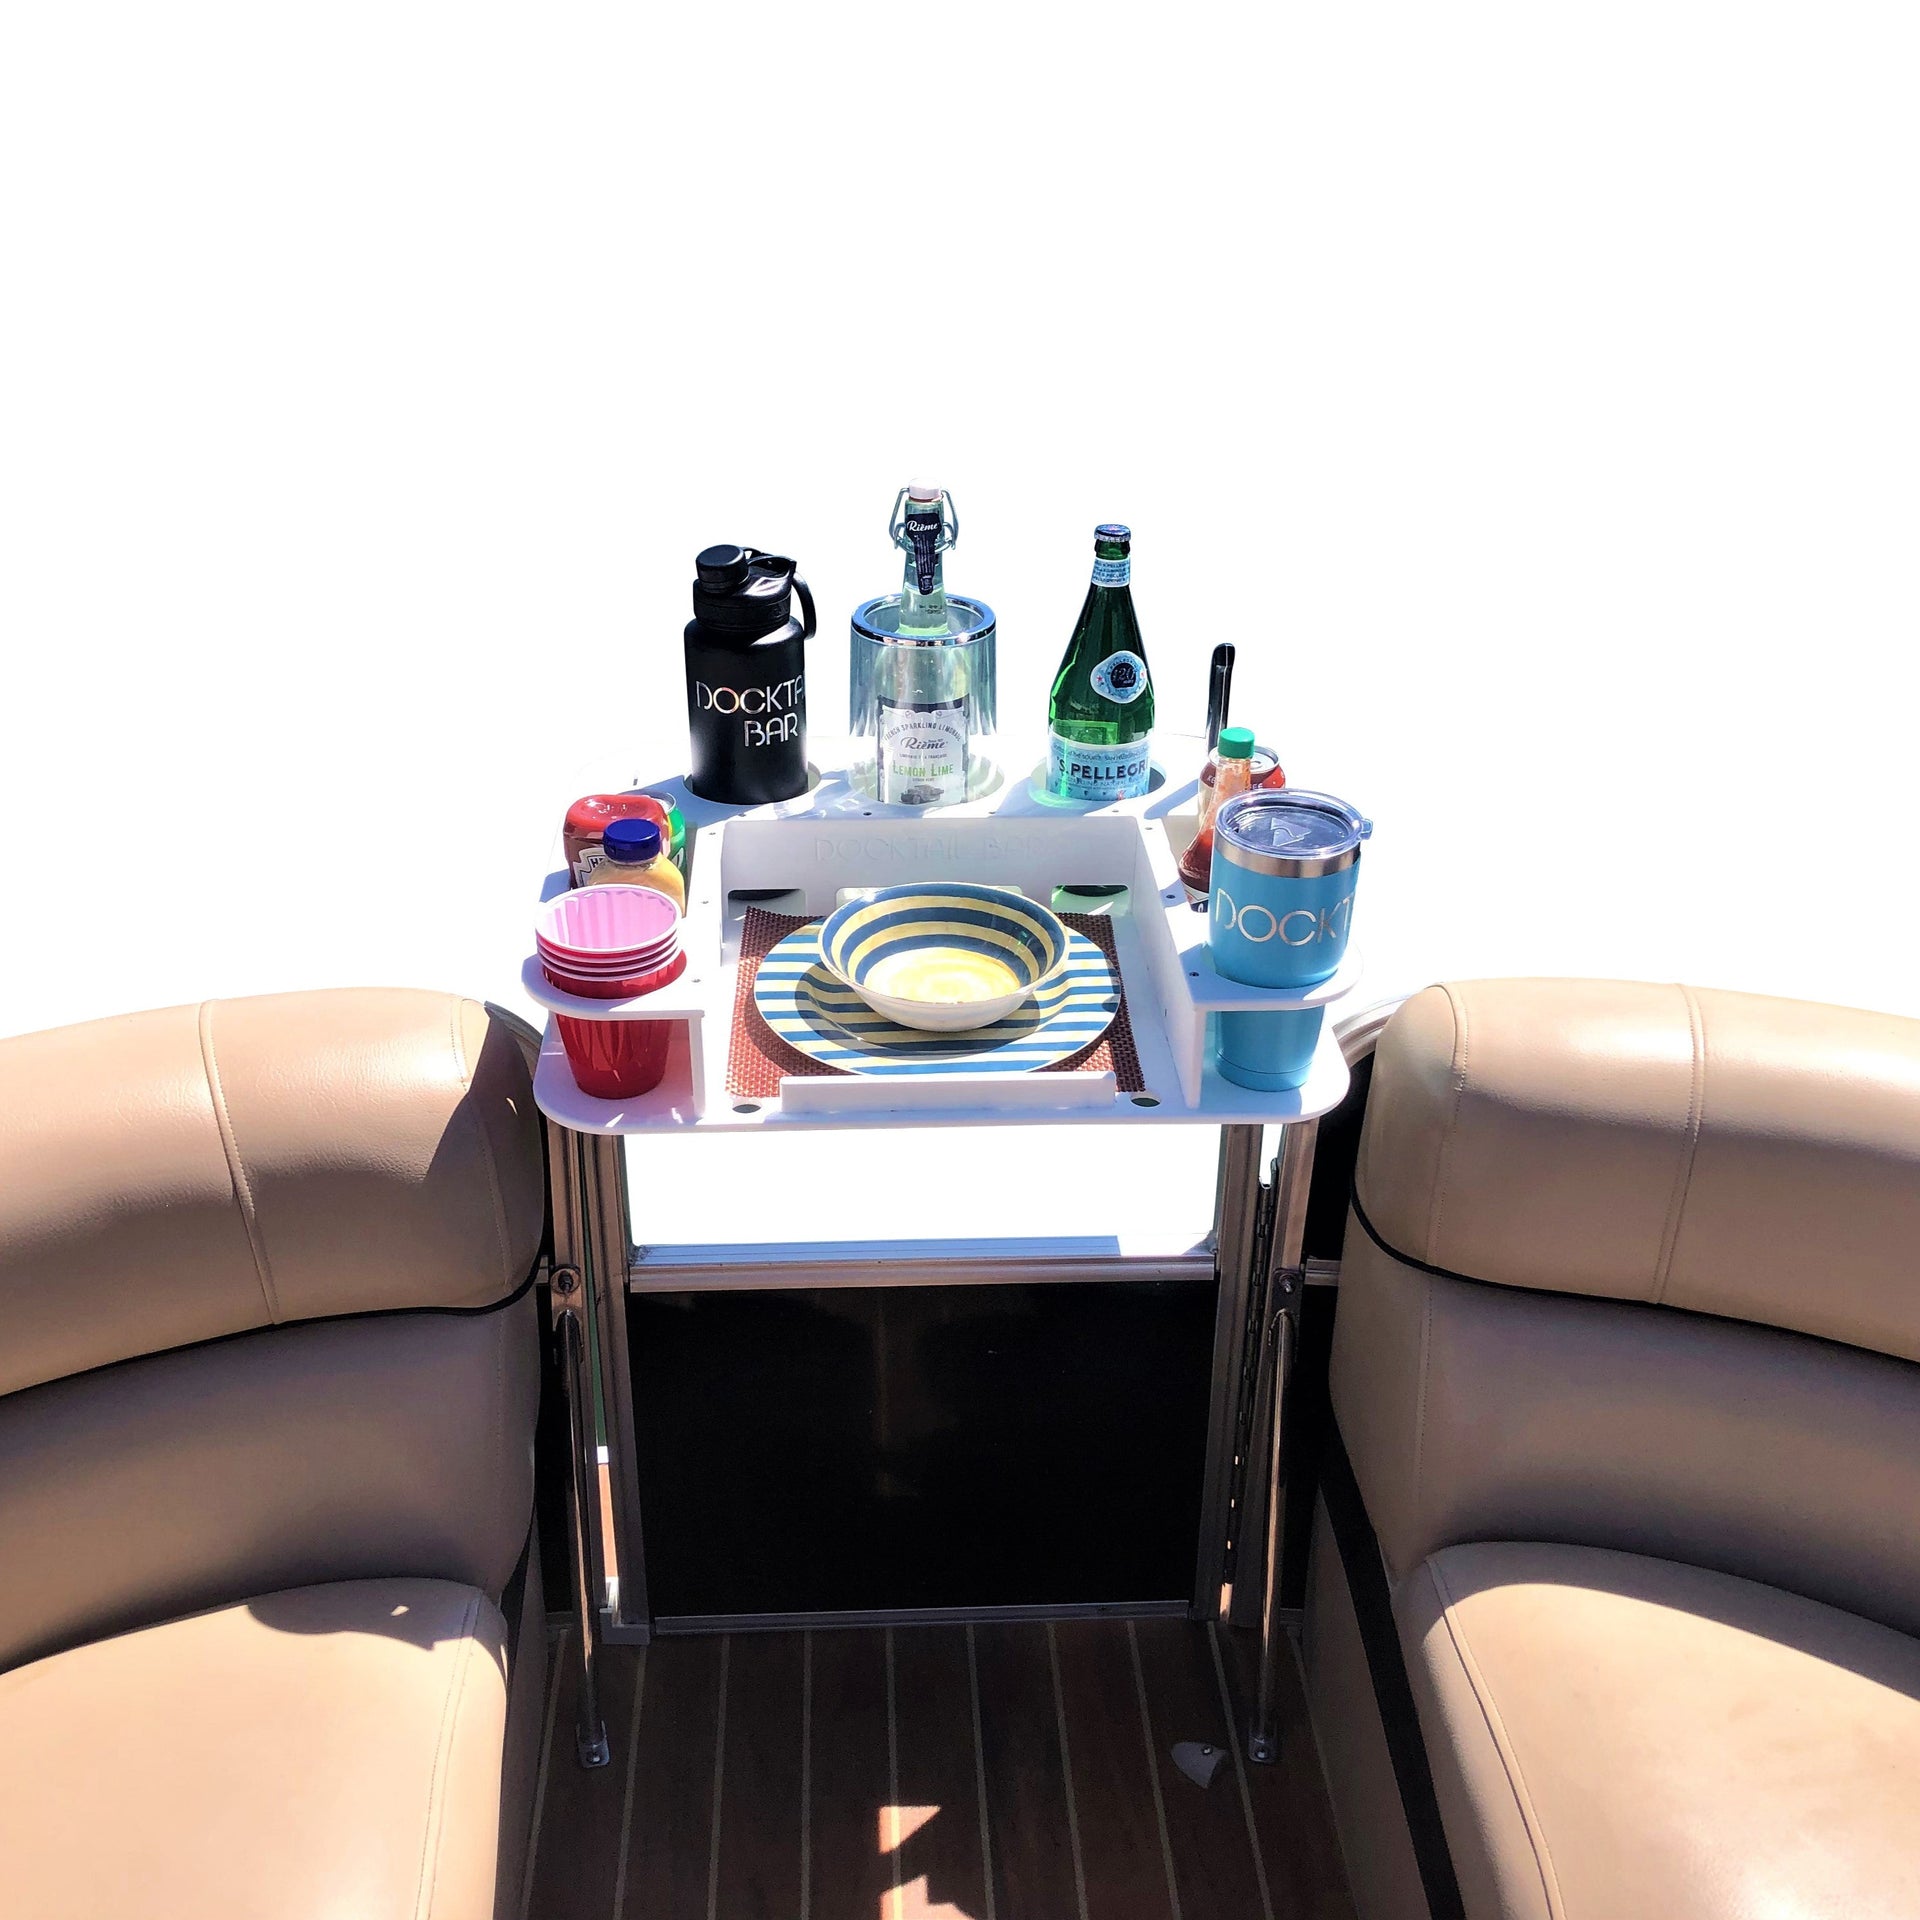 Pontoon Boat Table with Pontoon Rail Mount by Docktail Bar